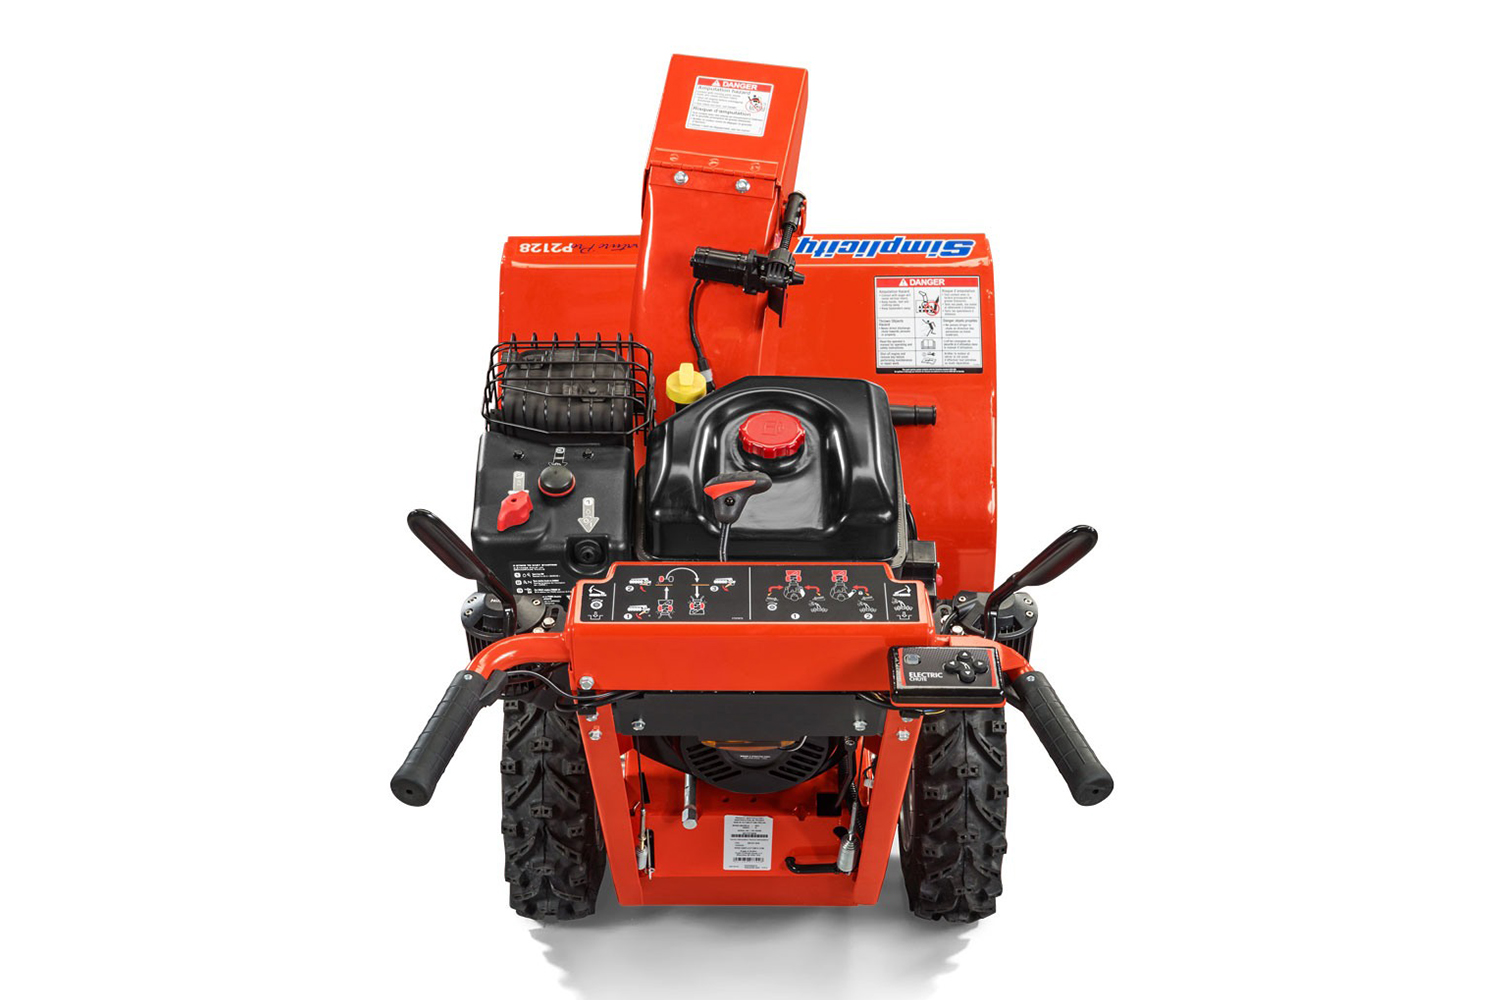 SIMPLICITY SIGNATURE PRO SERIES DUAL-STAGE SNOW BLOWER P2132<br/>*Model shown in image may vary.